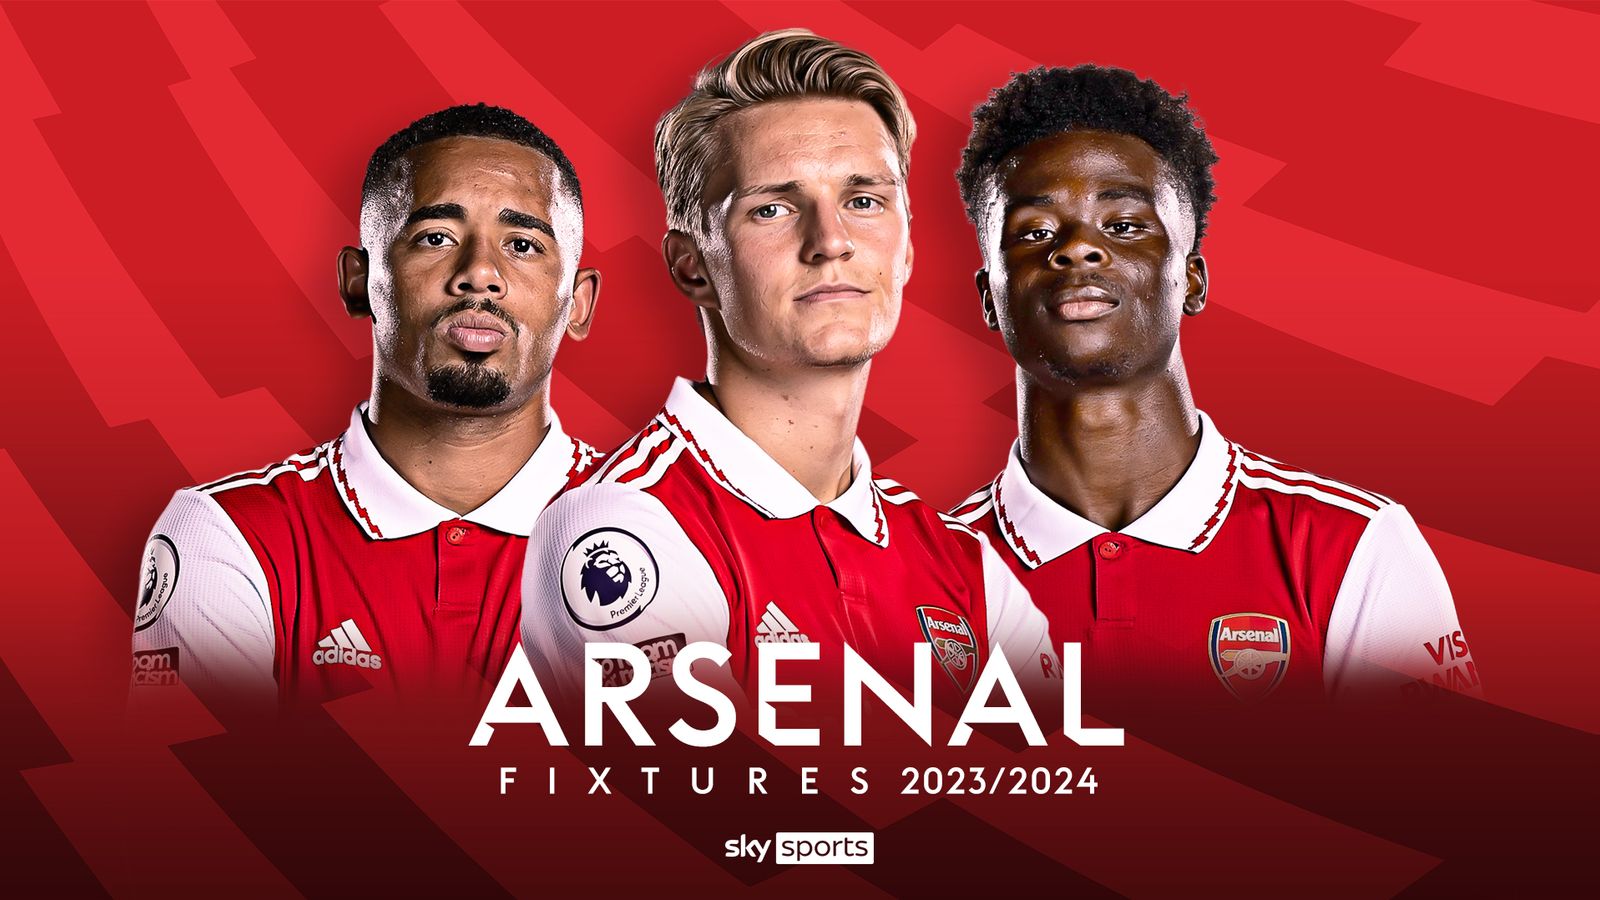 Arsenal Premier League 2023/24 fixtures and schedule Football News Sky Sports